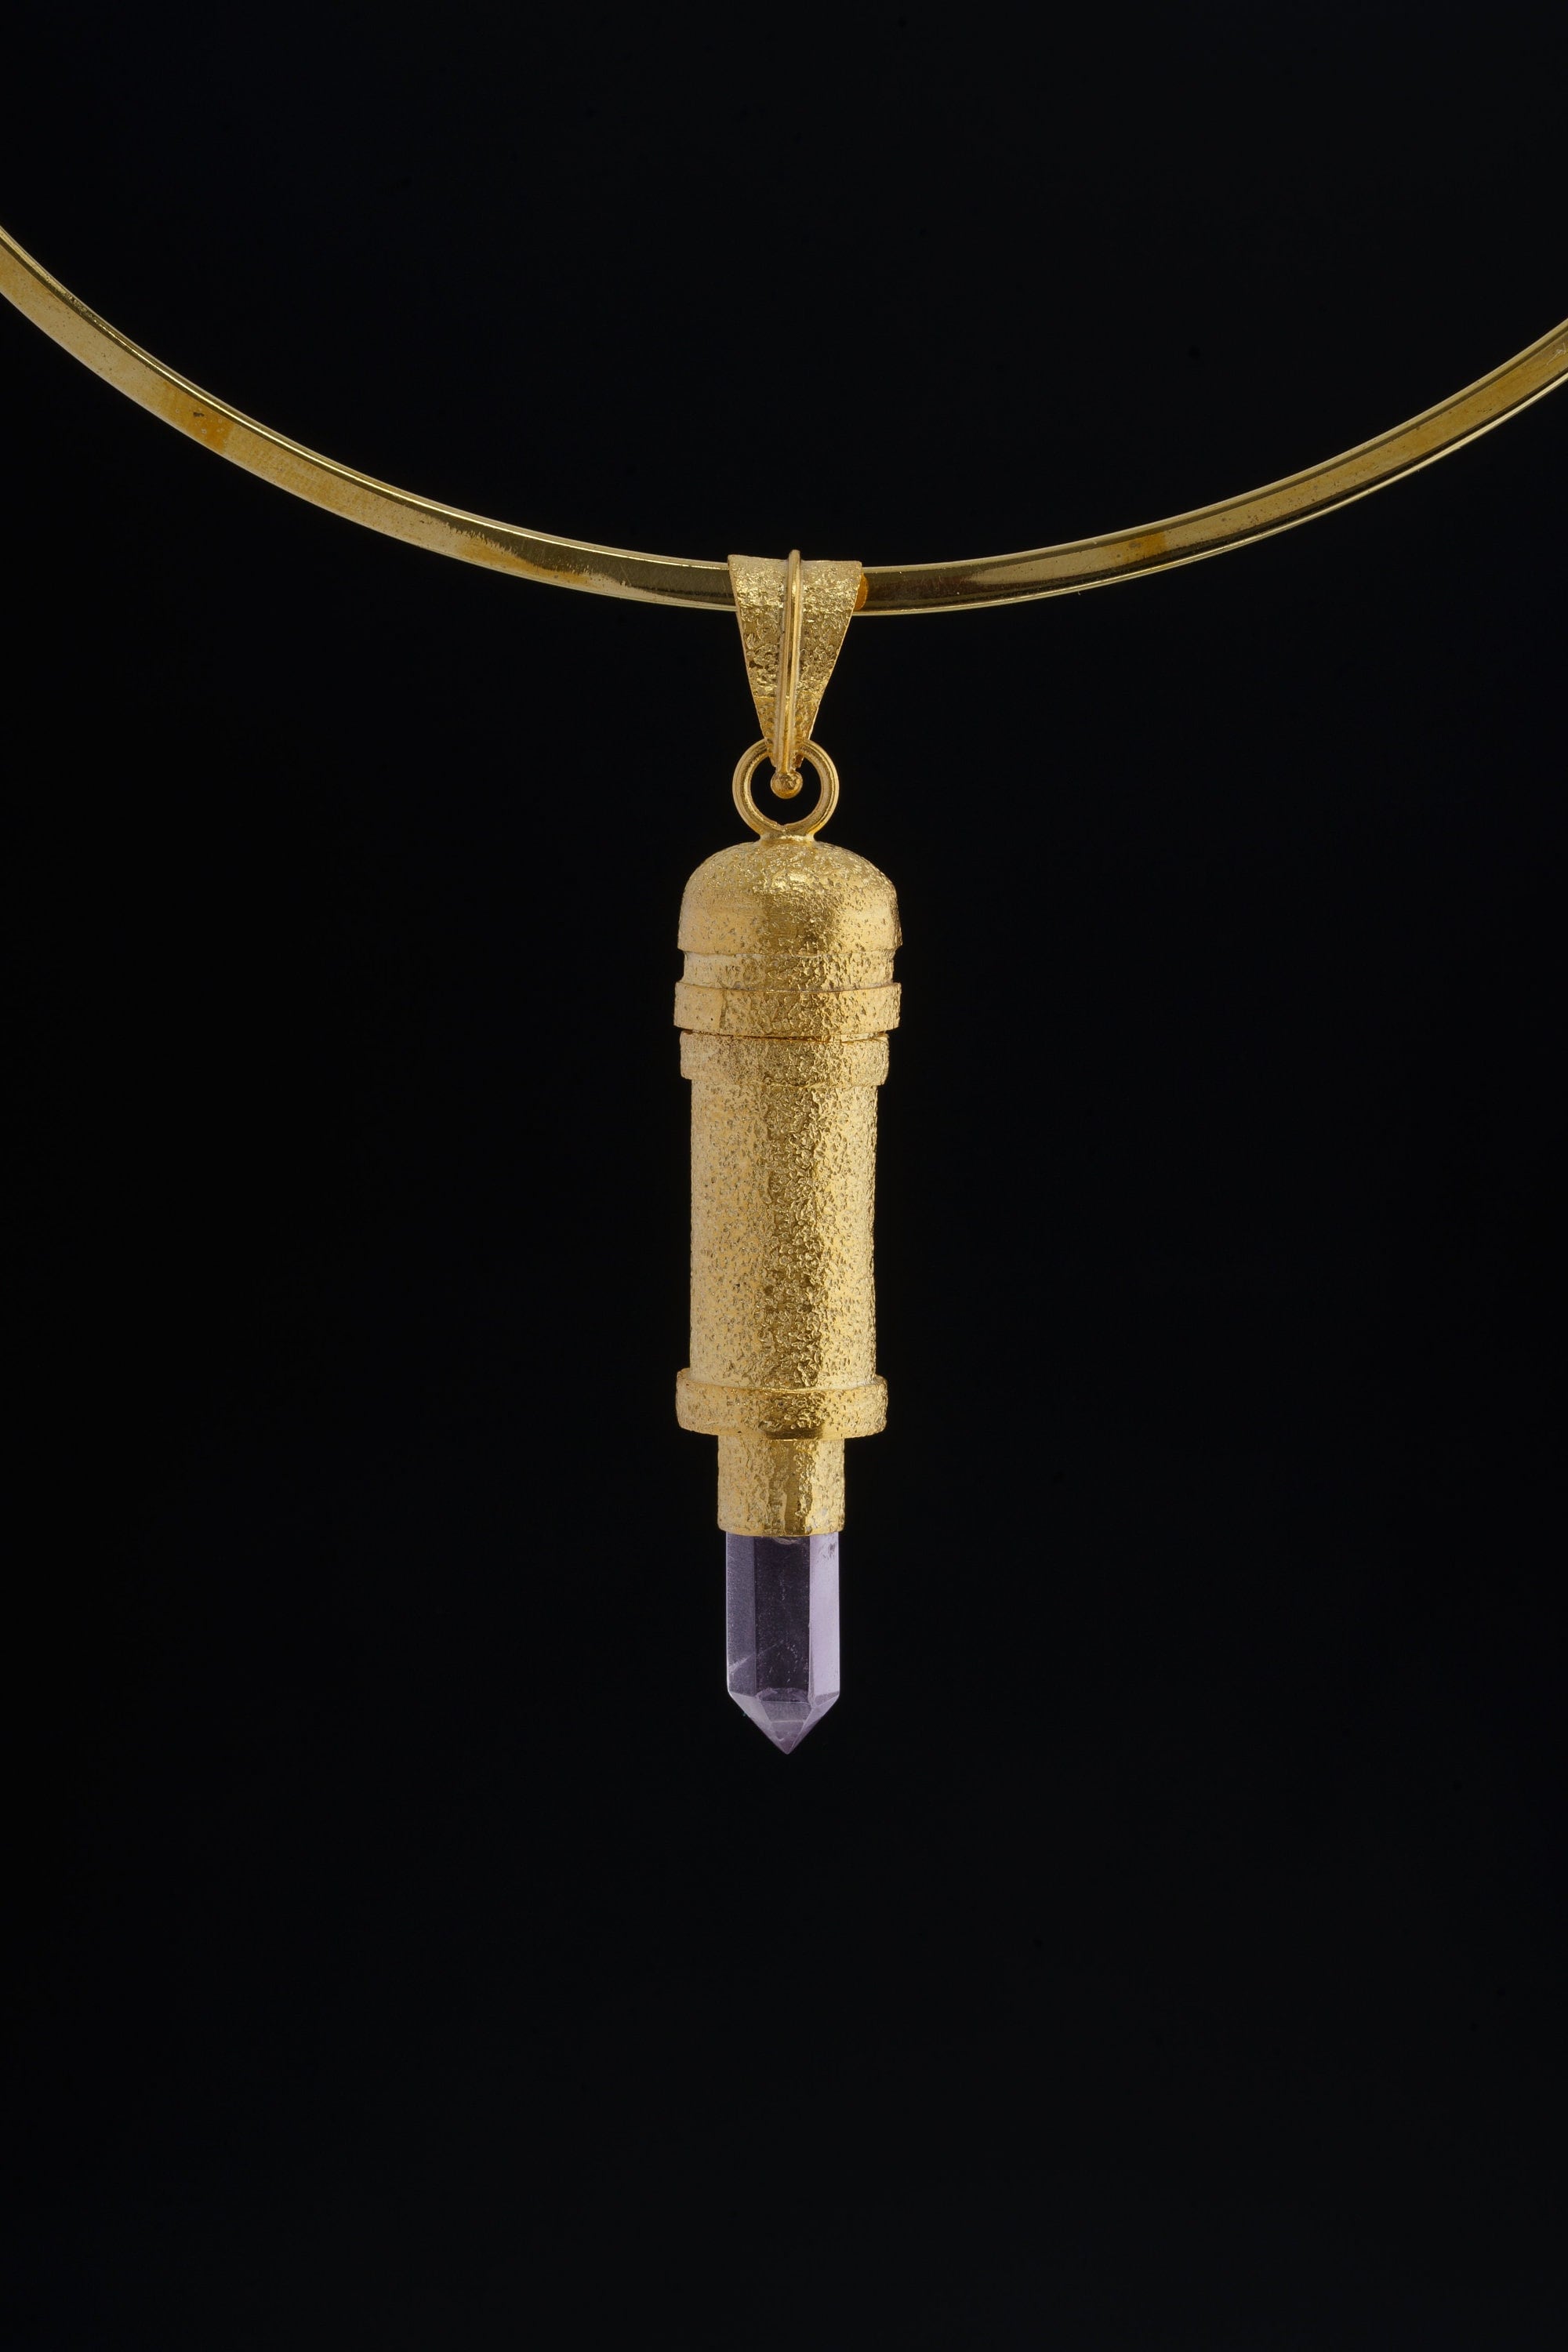 Cut Amethyst Generator Quartz - Sizable Solid Capsule Locket - Stash Urn - Textured & Gold Plated Sterling Silver Pendant - No 23